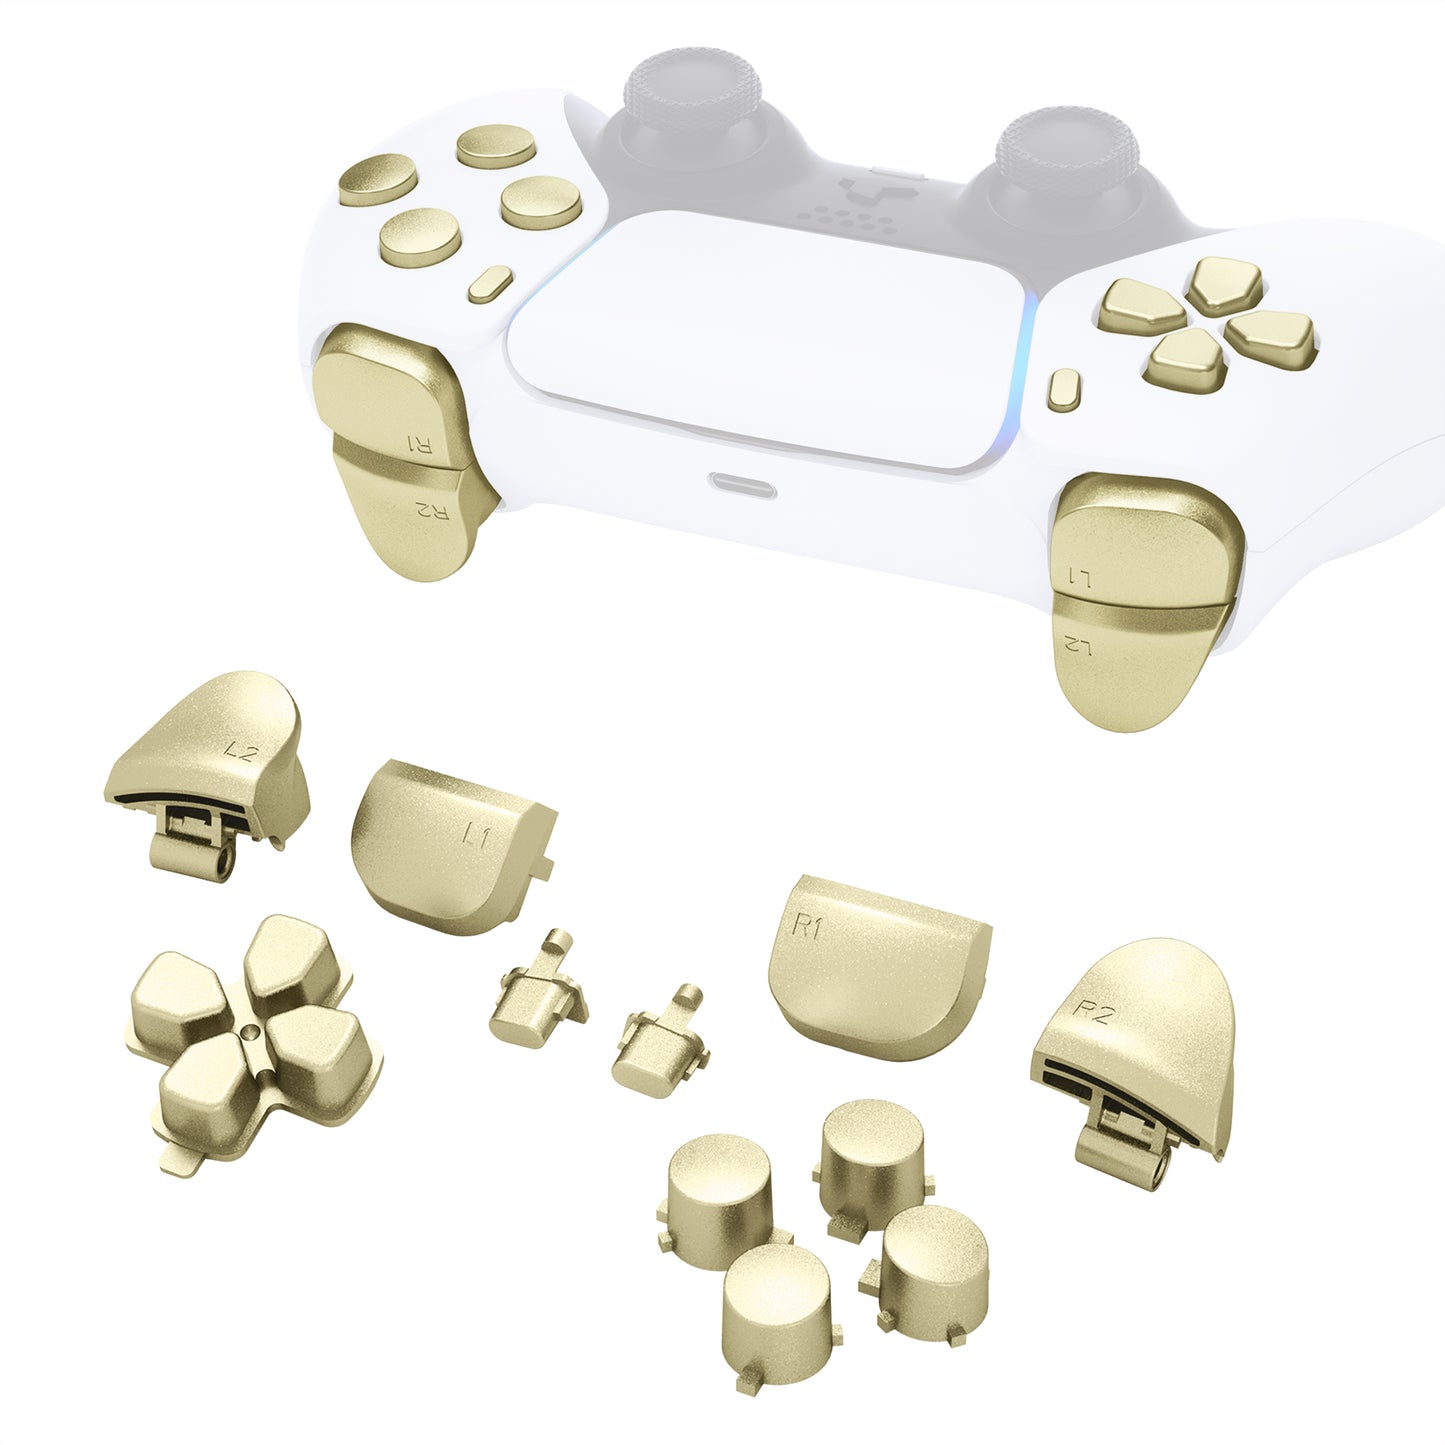 eXtremeRate Retail Replacement D-pad R1 L1 R2 L2 Triggers Share Options Face Buttons, Metallic Champagne Gold Full Set Buttons Compatible With ps5 Controller BDM-010 & BDM-020 - JPF1041G2